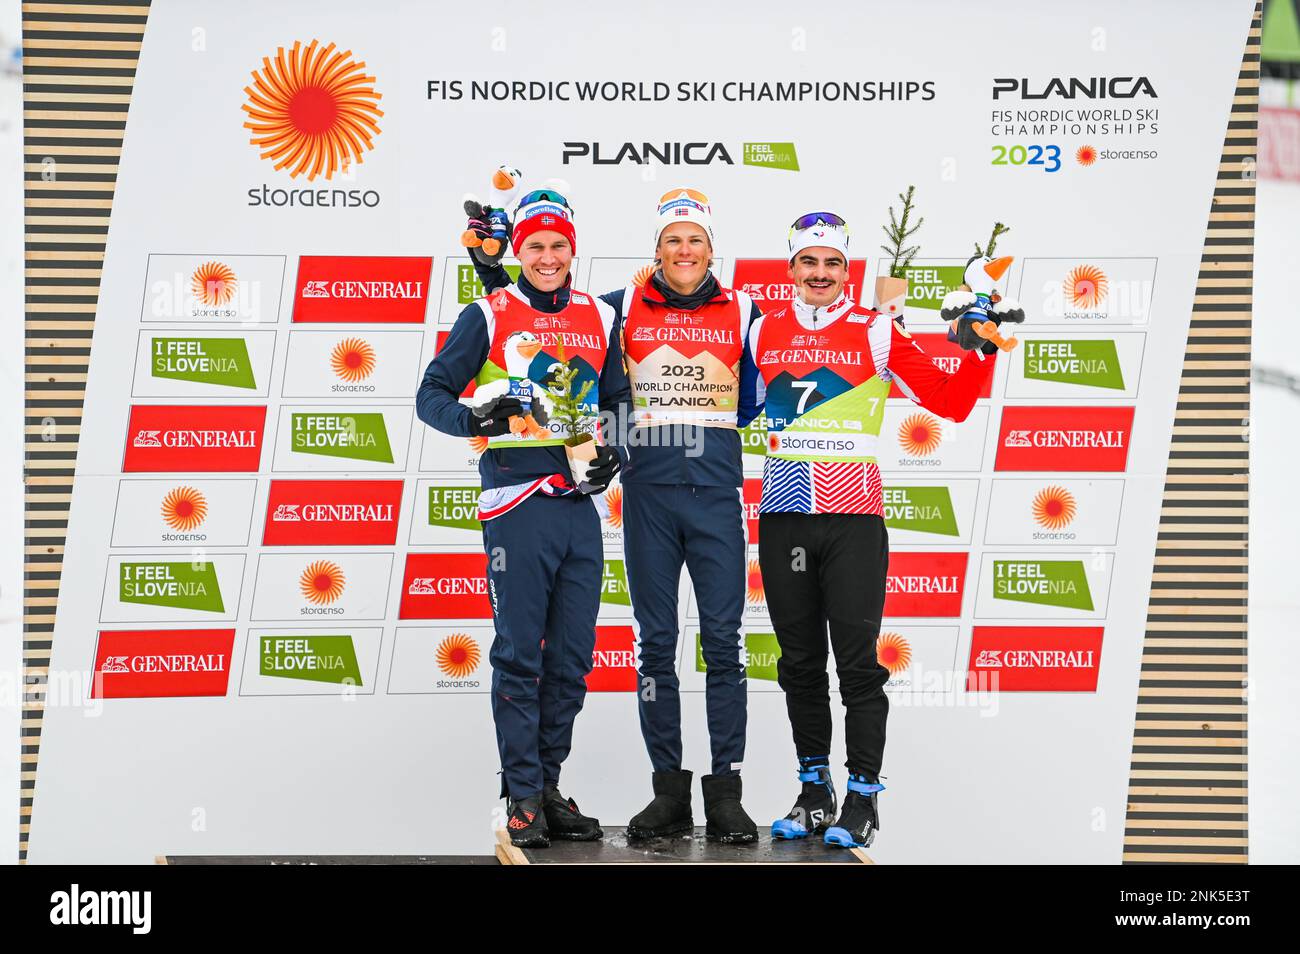 Norway's Johannes Hoesflot Klaebo, center, celebrates after winning the sprint at the 2023 FIS World Nordic Ski Championships in Planica, Slovenia, February 23, 2023. On his right, Paal Golberg (Norway), who finished second, and France's Jules Chappaz, who finished third. Credit: John Candler Lazenby/Alamy Live News Stock Photo